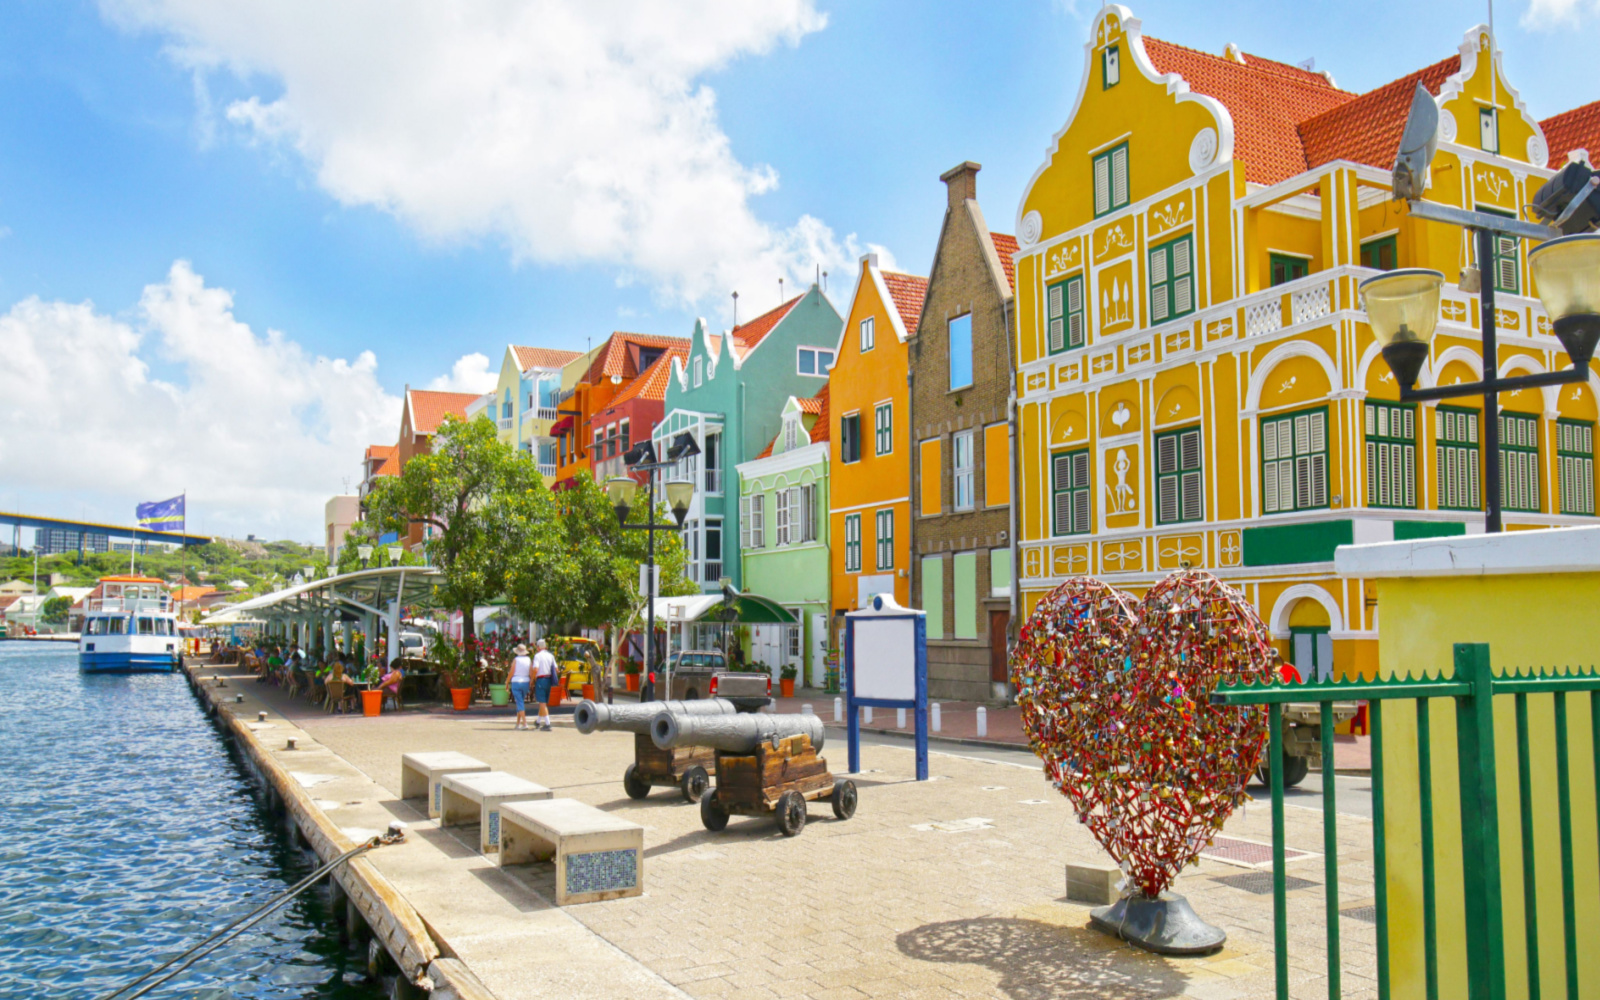 Is Curacao Safe? | Travel Tips & Safety Concerns